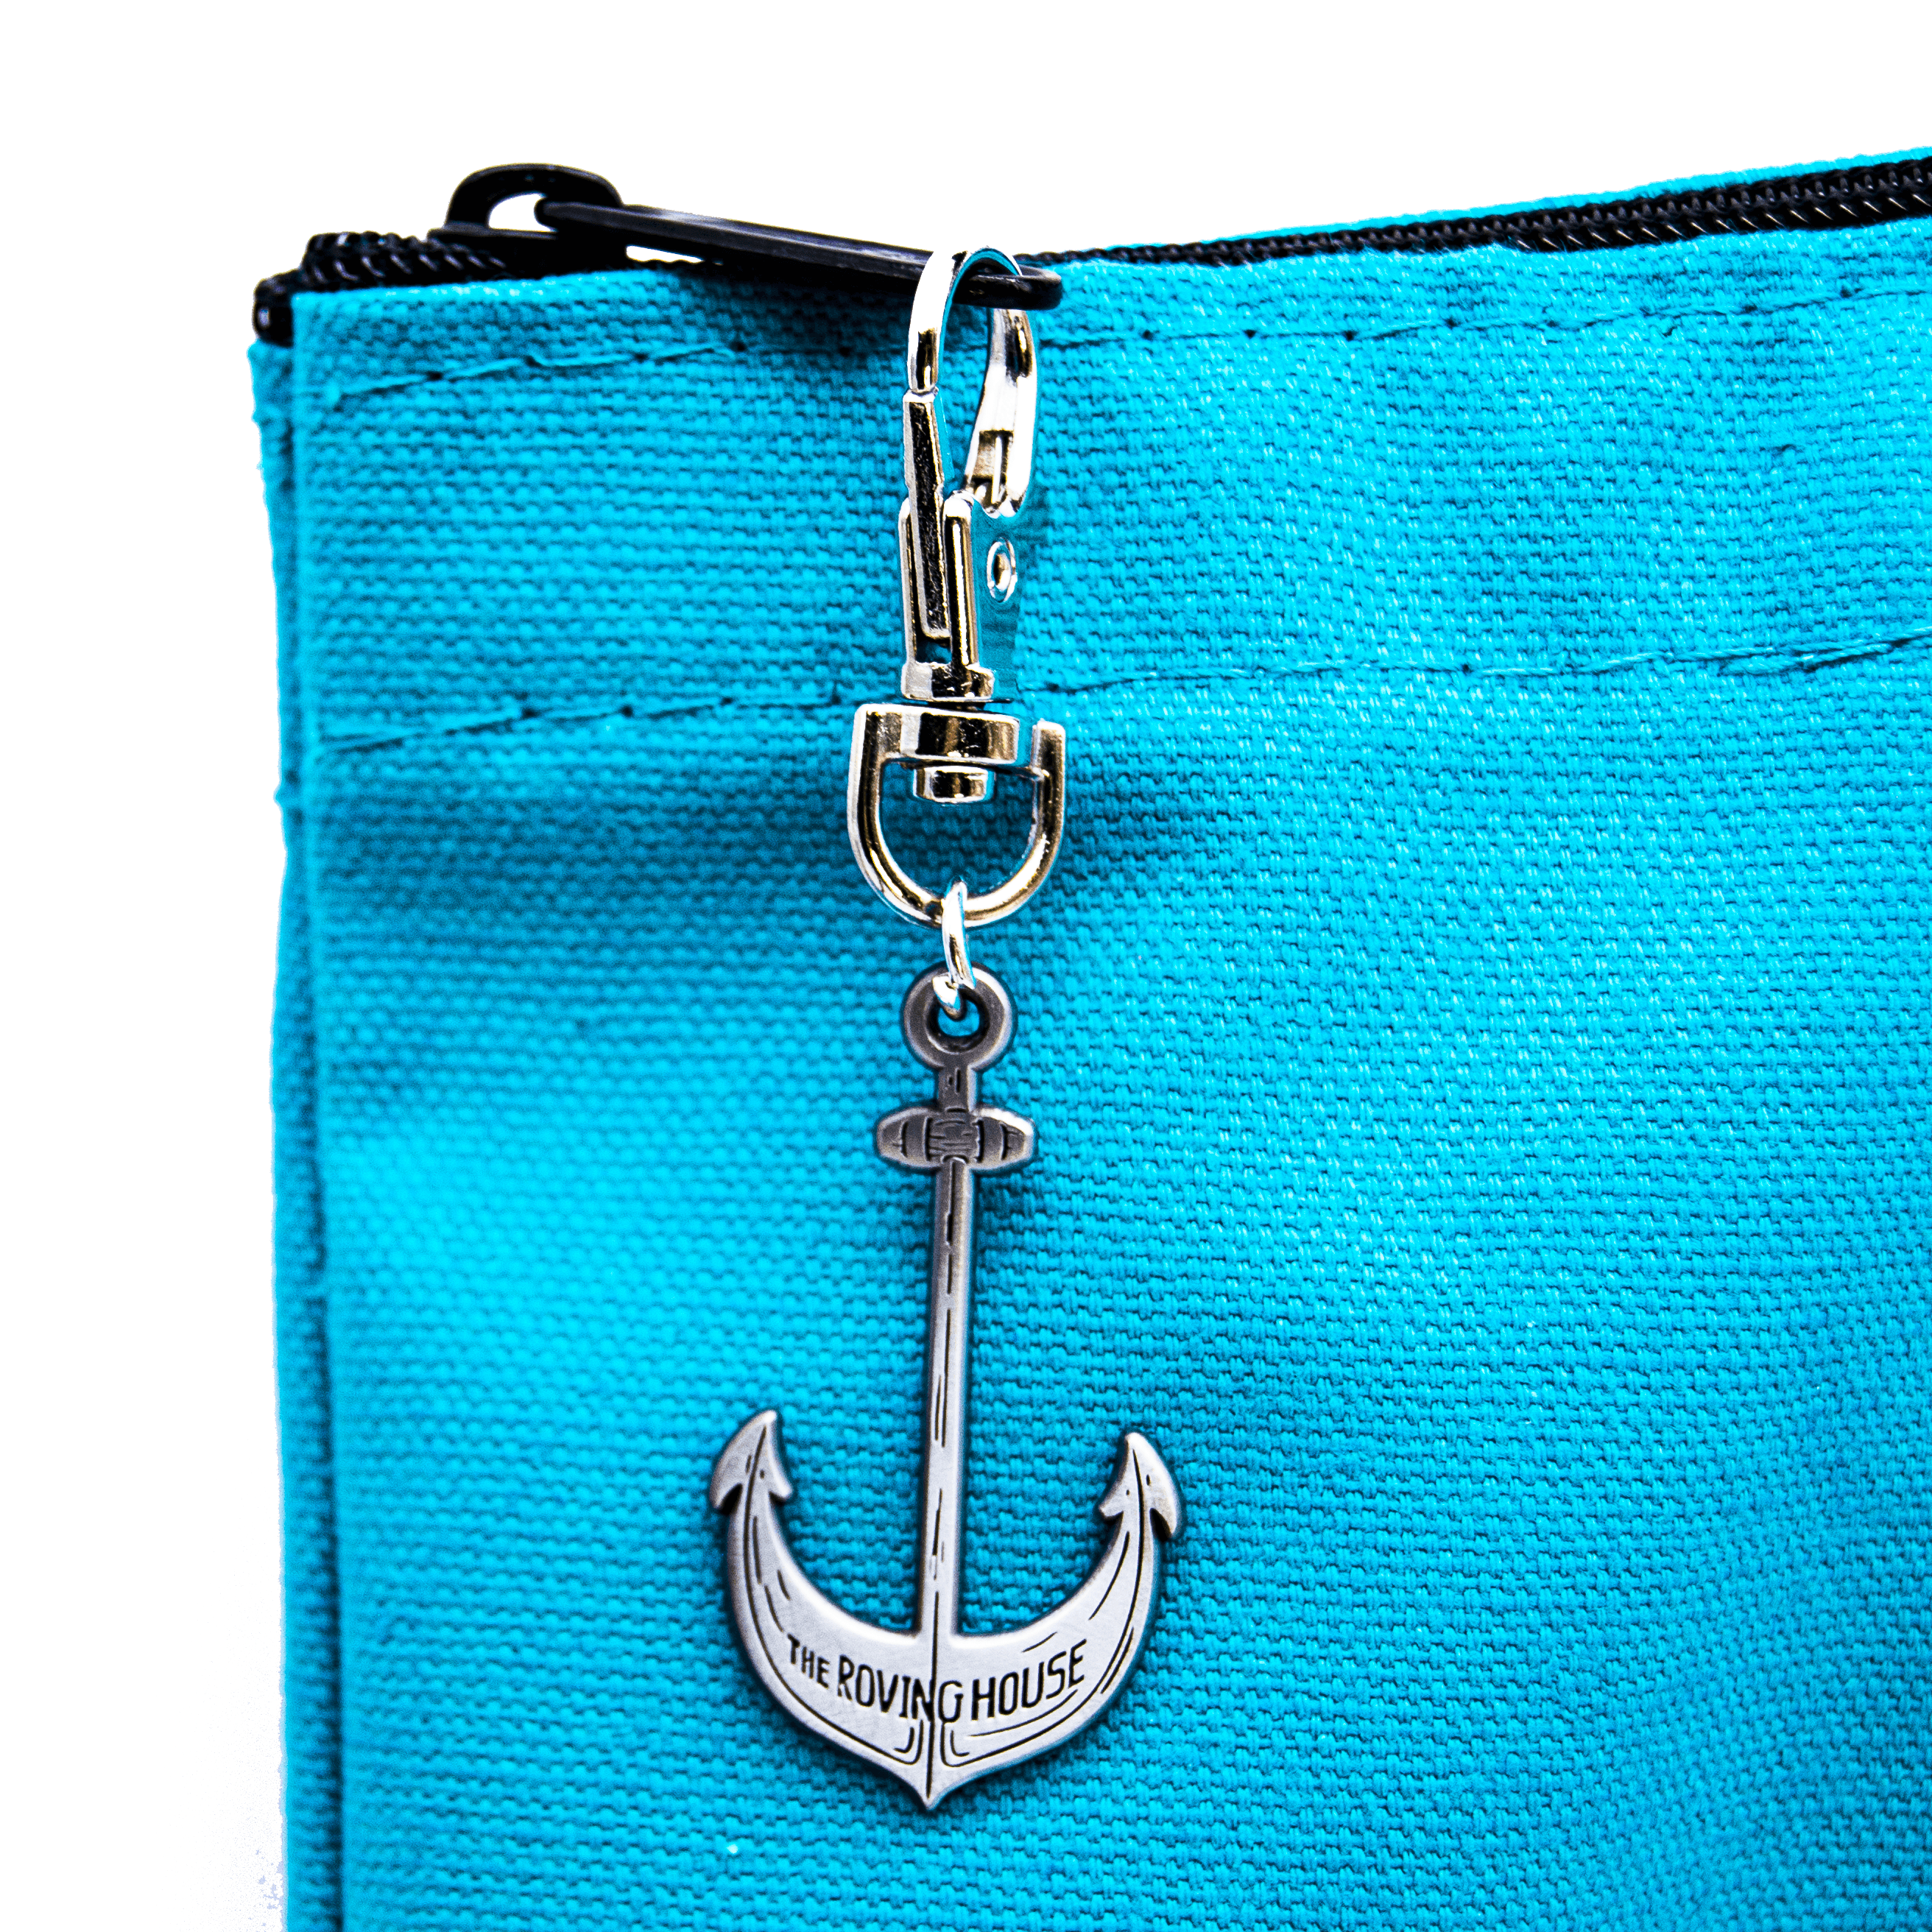 A close up of the ship's anchor shaped zipper pull on the turquoise tote bag. Small text on the anchor reads "The Roving House".